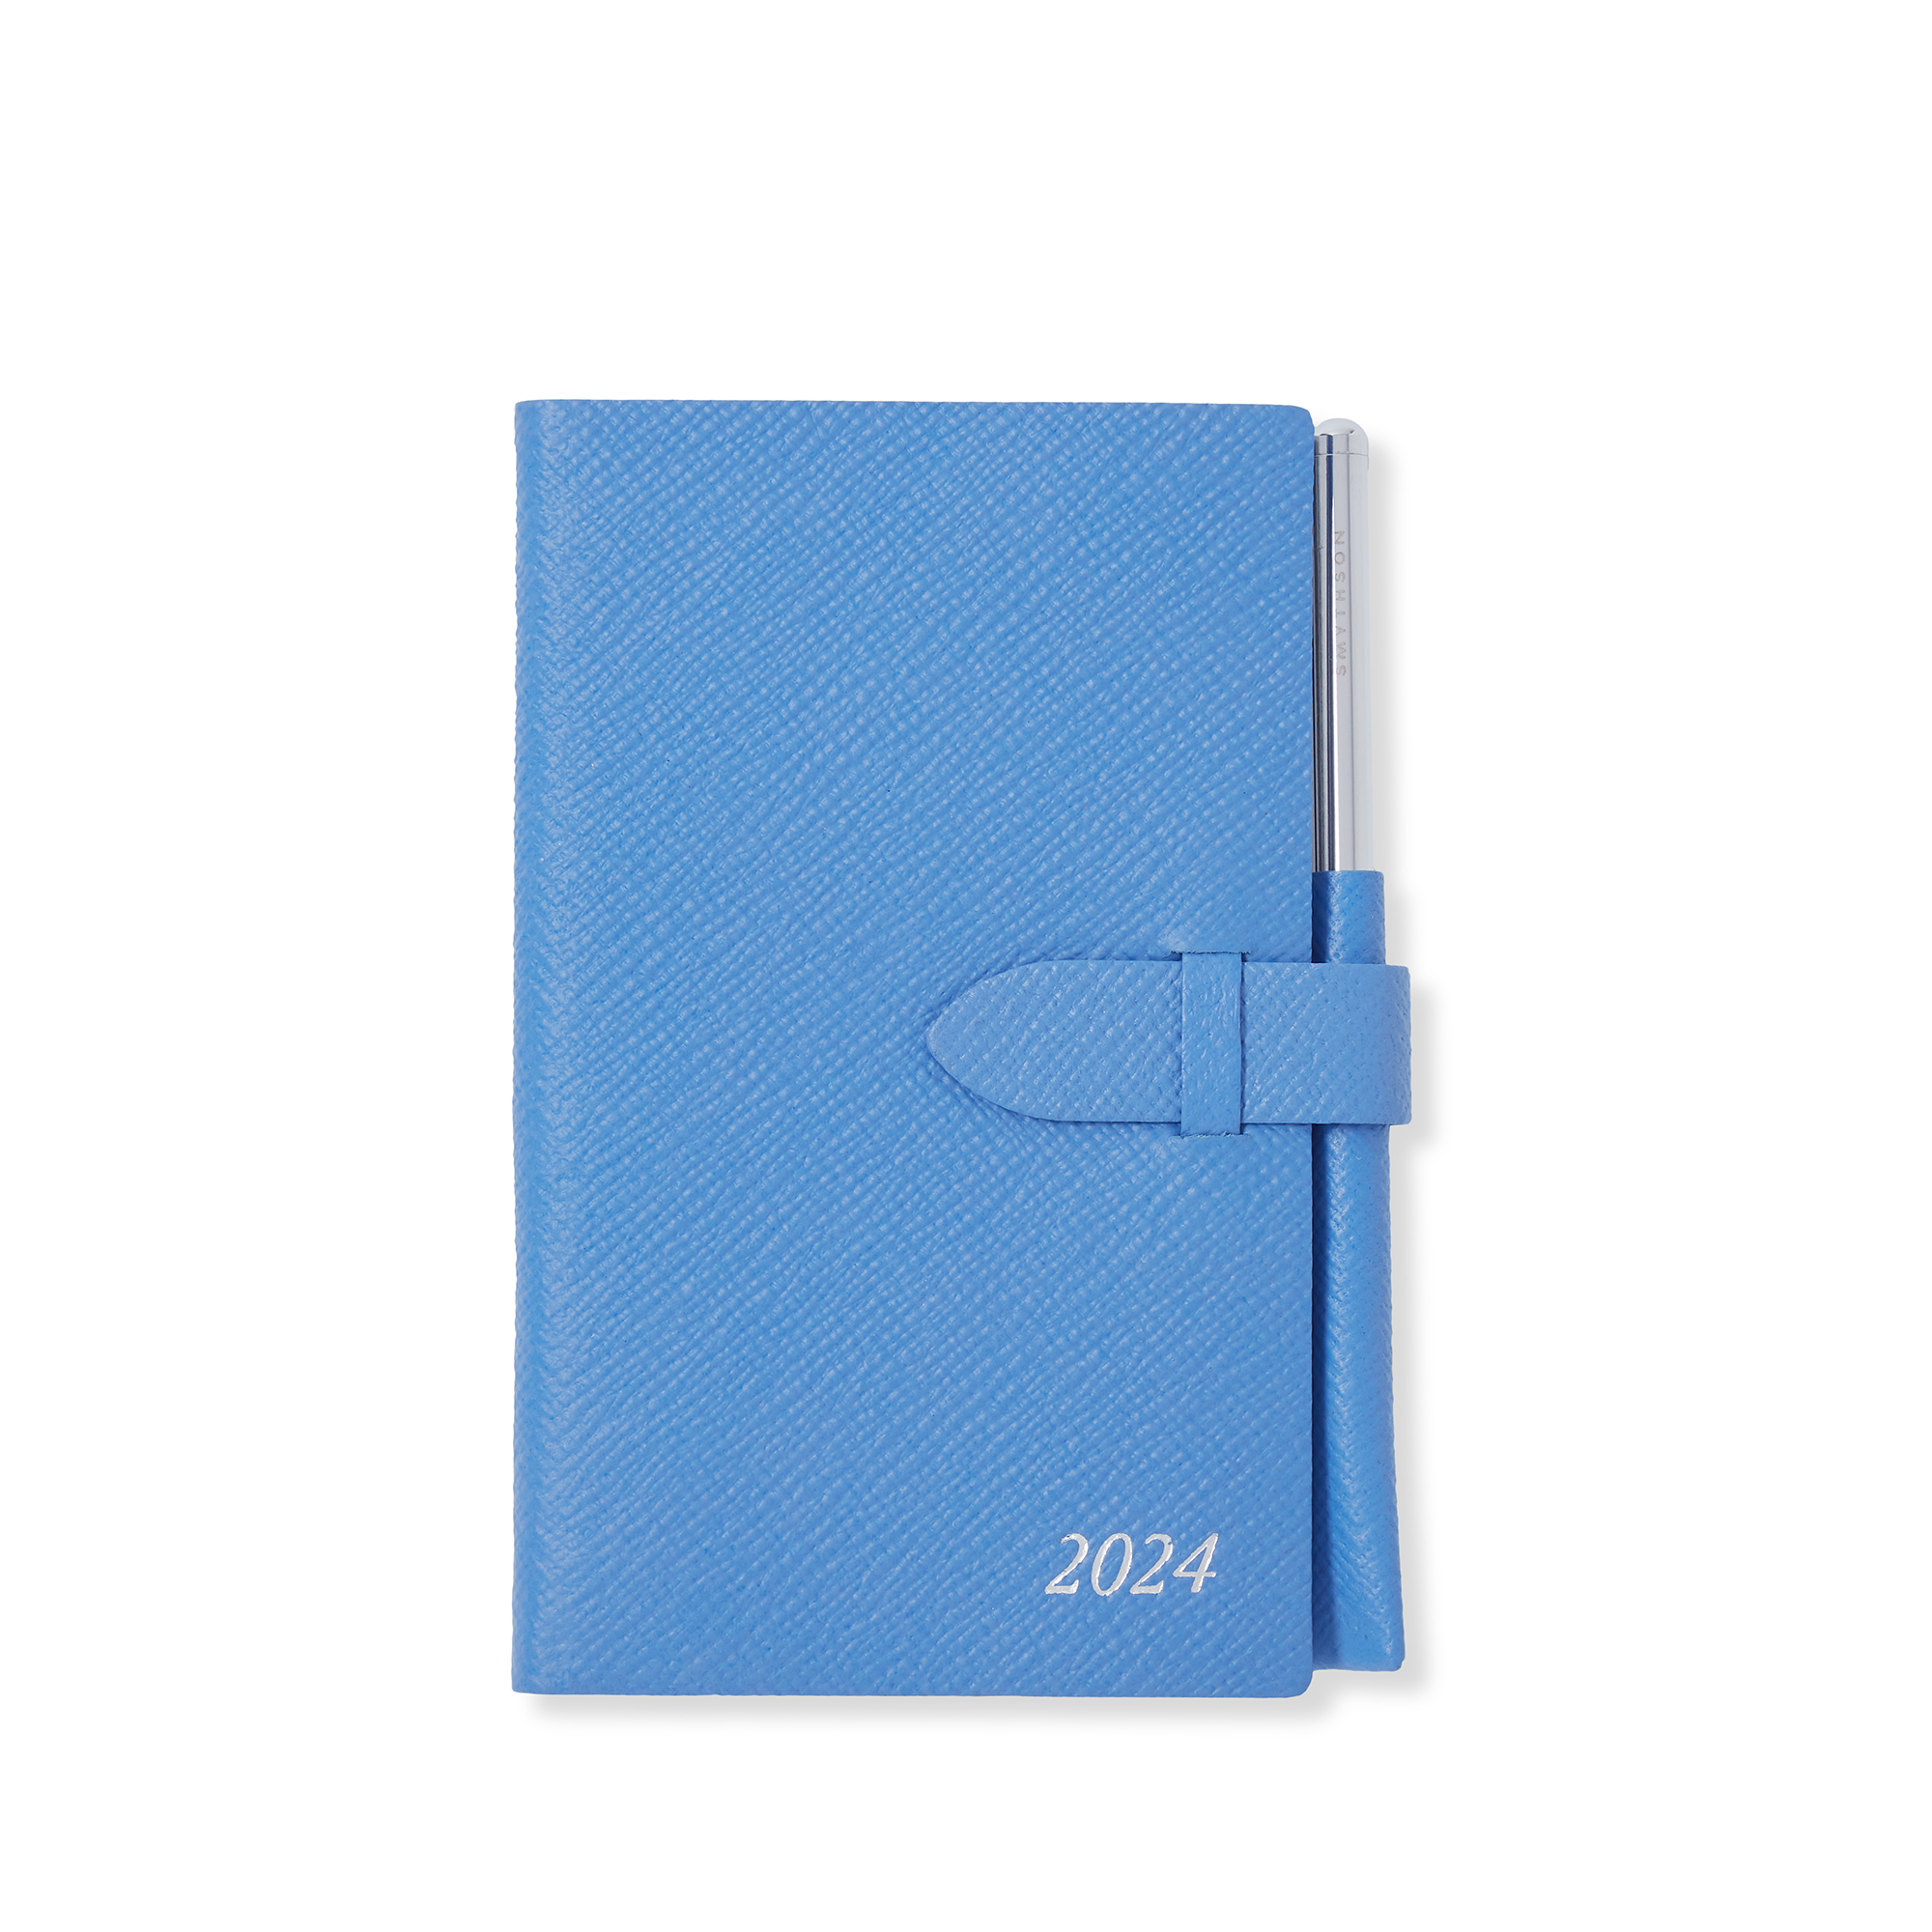 Smythson 2024 Panama Weekly Diary With Pencil In Nile Blue